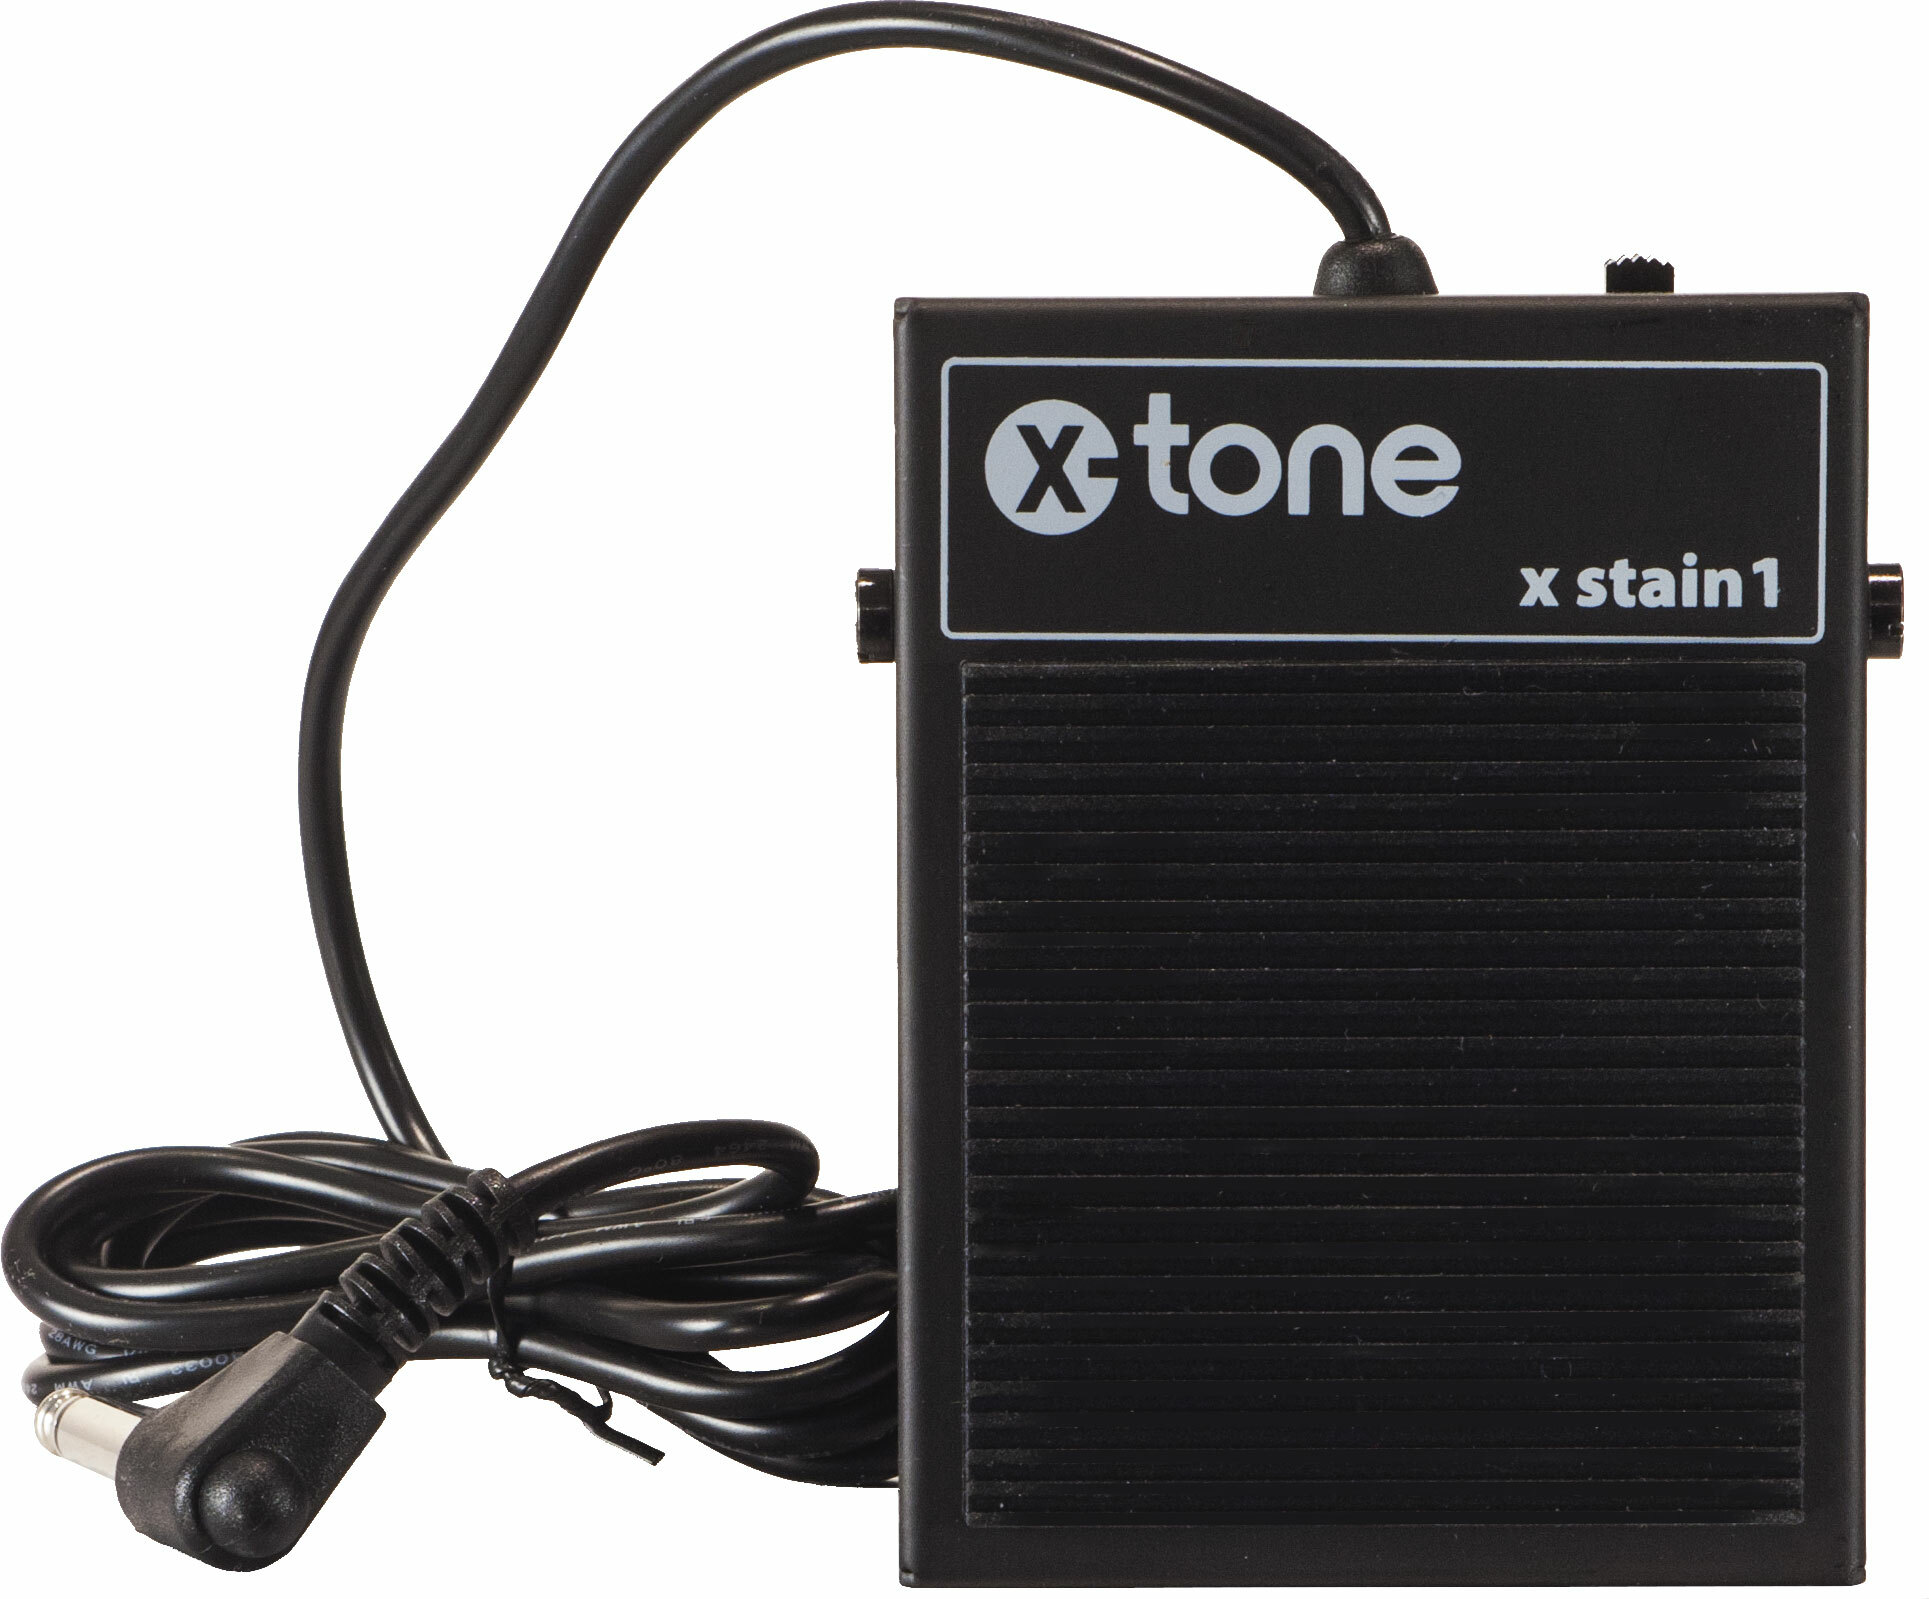 X-tone X-stain 1 Pedale Sustain - Sustain pedal for Keyboard - Main picture